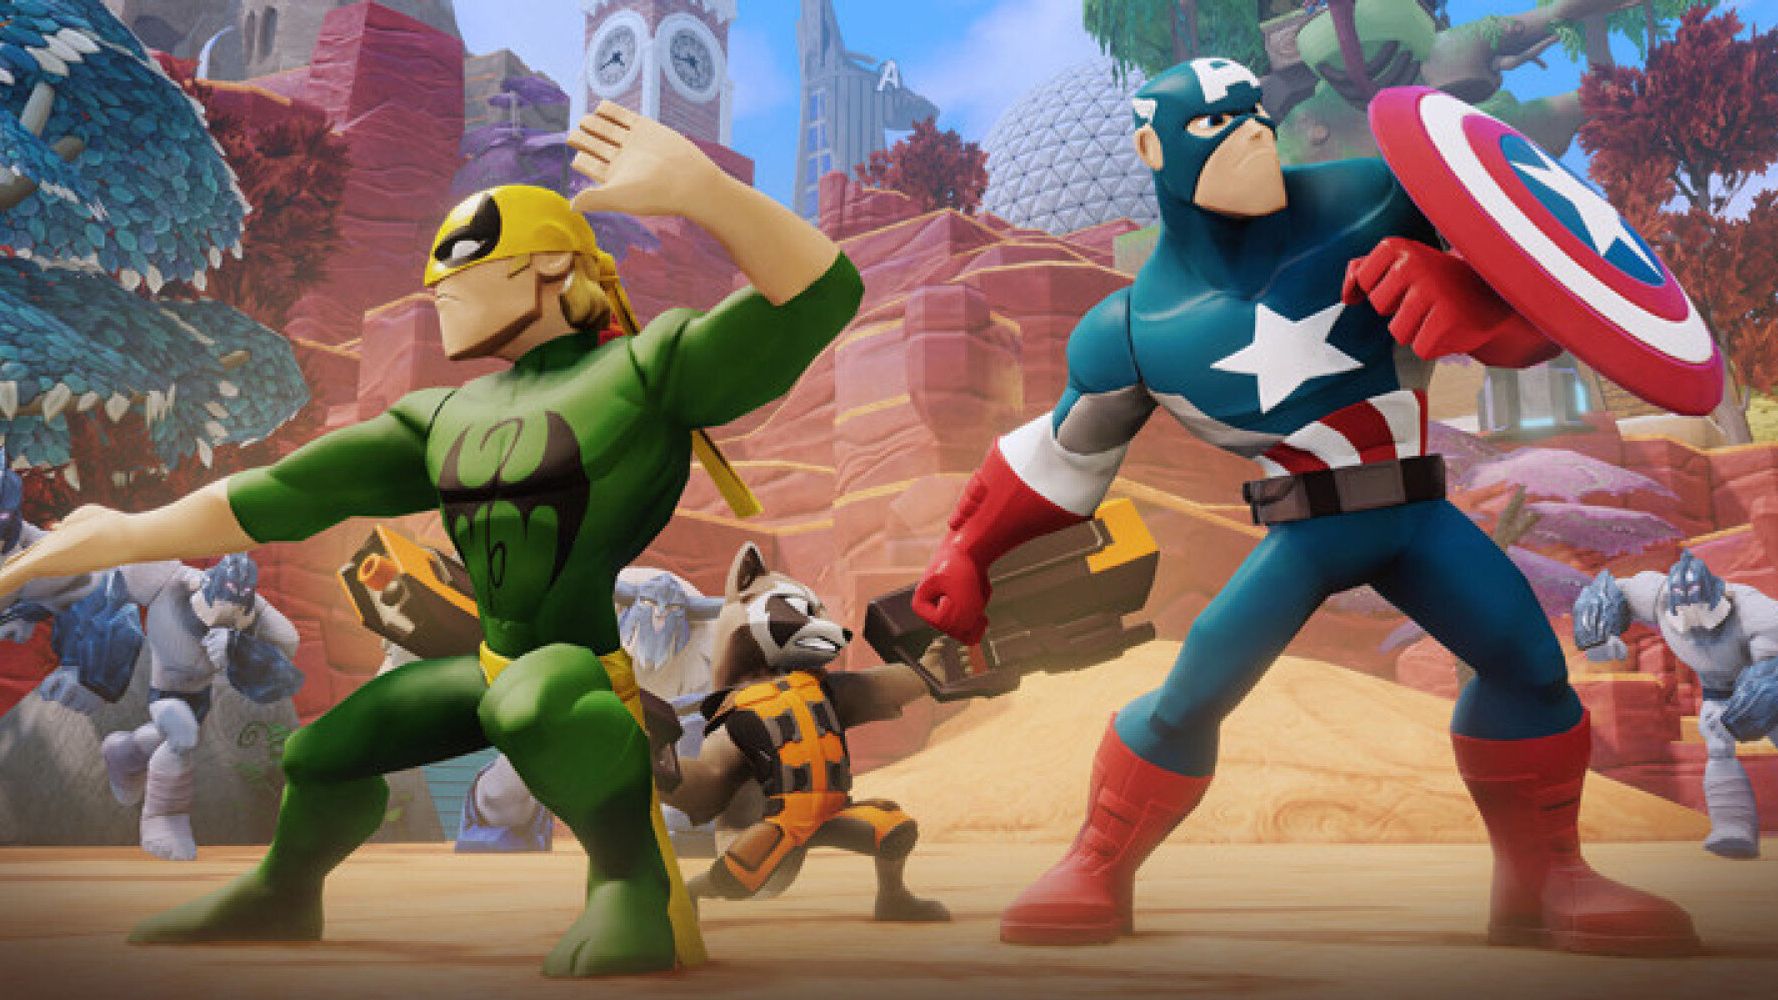 disney-infinity-marvel-super-heroes-2-0-edition-review-toys-overload-huffpost-uk-tech